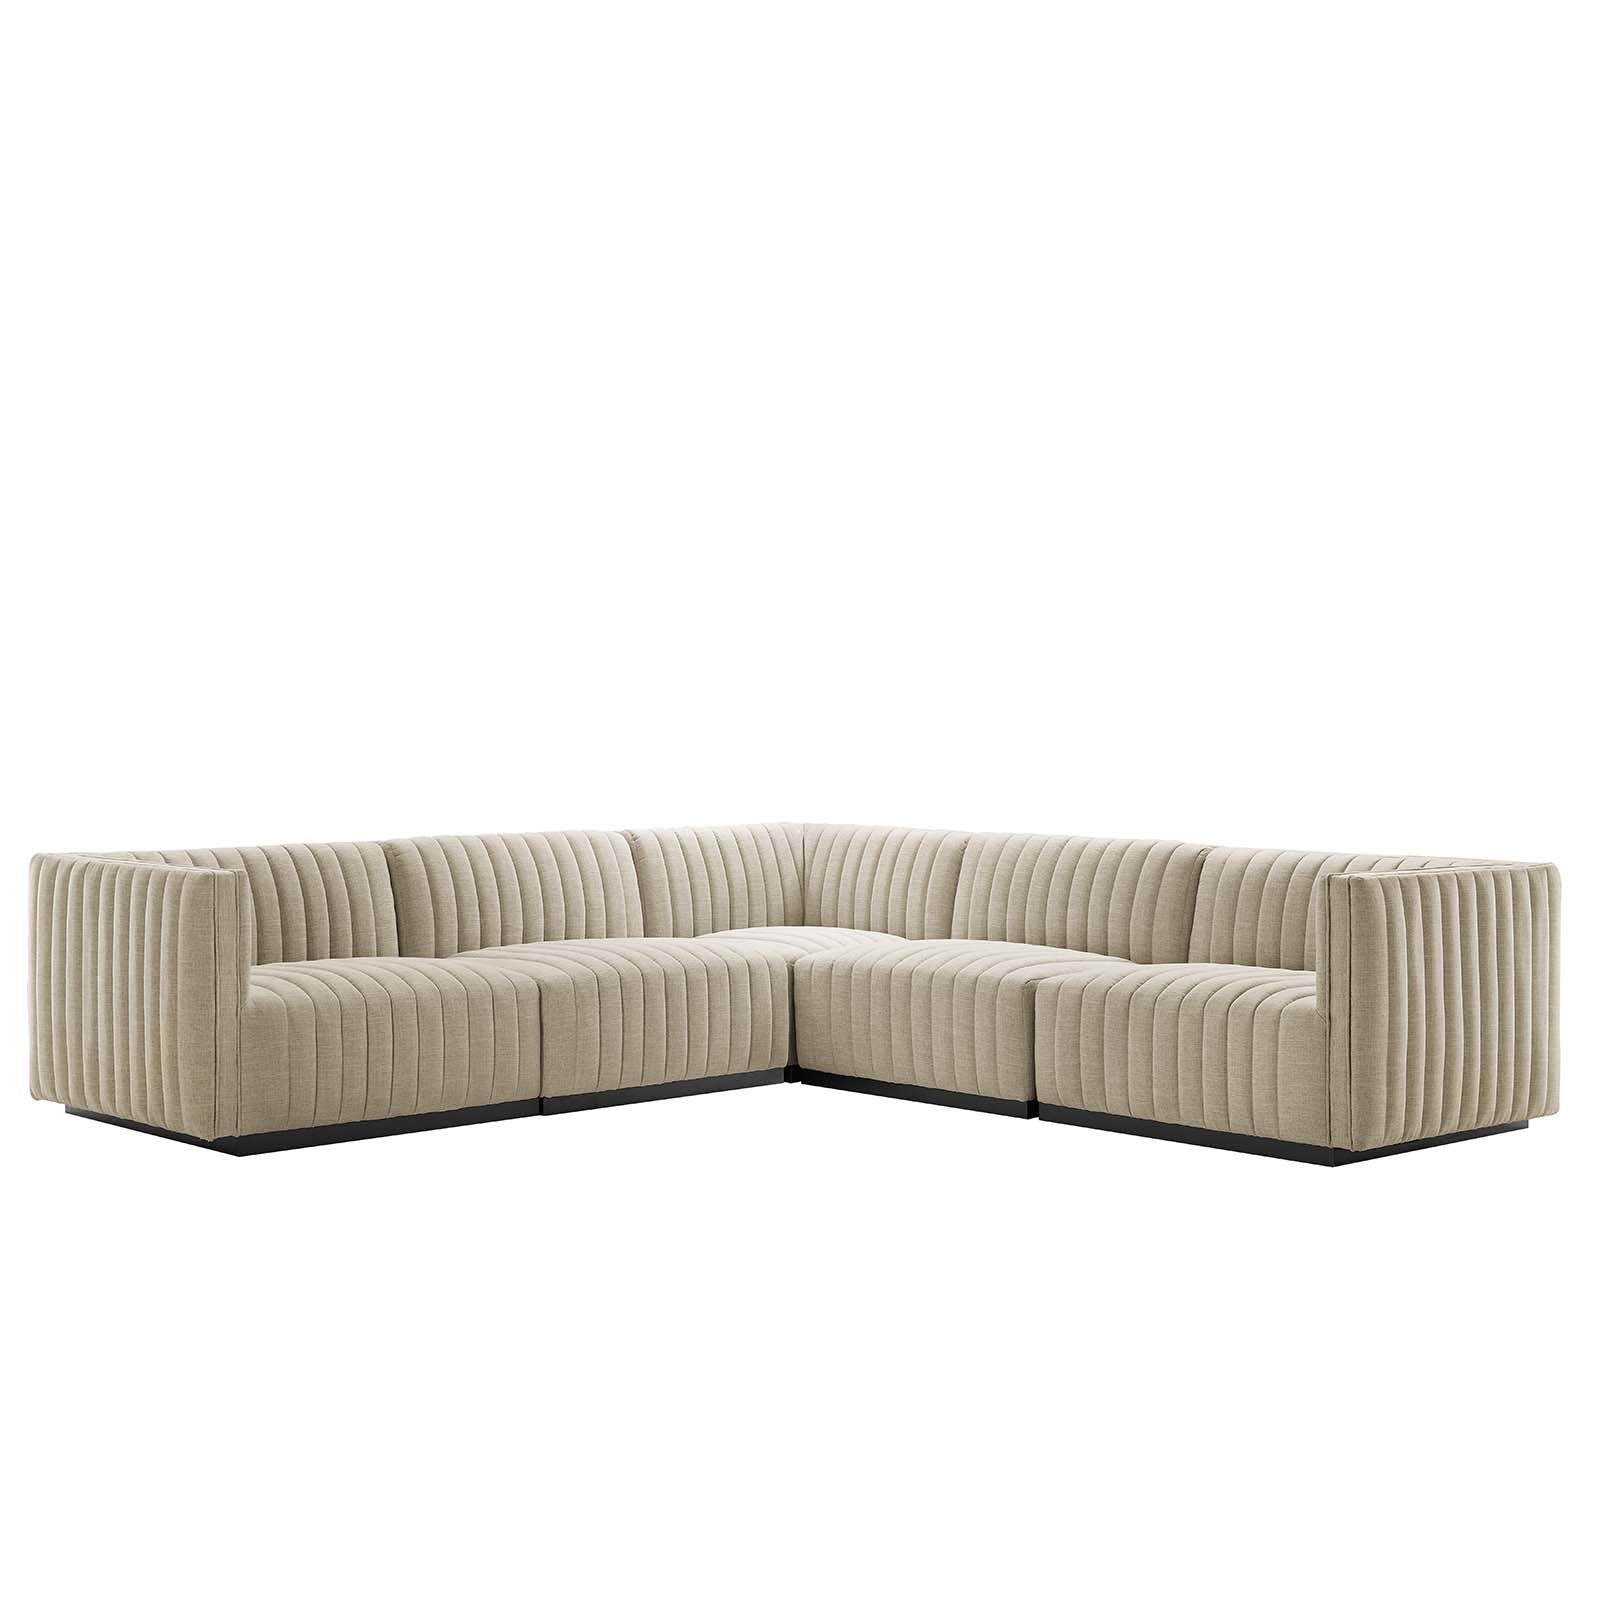 Modway Sectional Sofas - Conjure Channel Tufted 114 " W Upholstered Fabric 5-Piece L-Shaped Sectional Black Beige